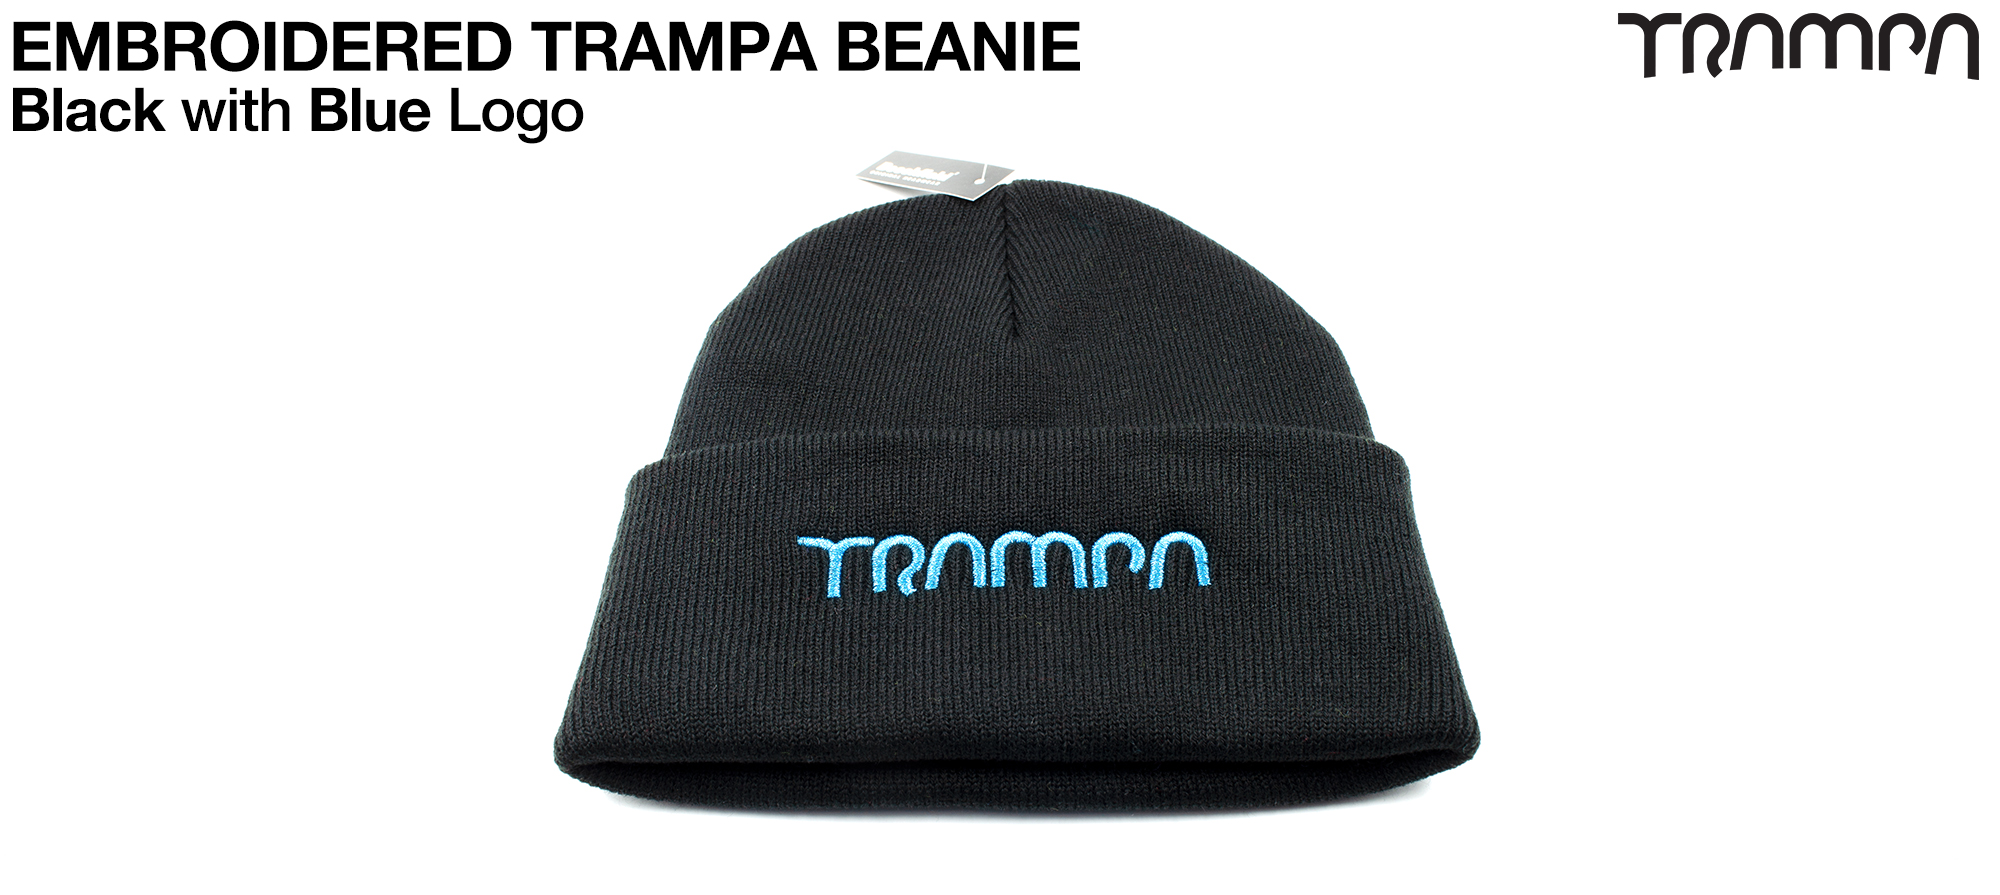 BLACK Woolie hat with BLUE TRAMPA logo  - Double thick turn over for extra warmth 